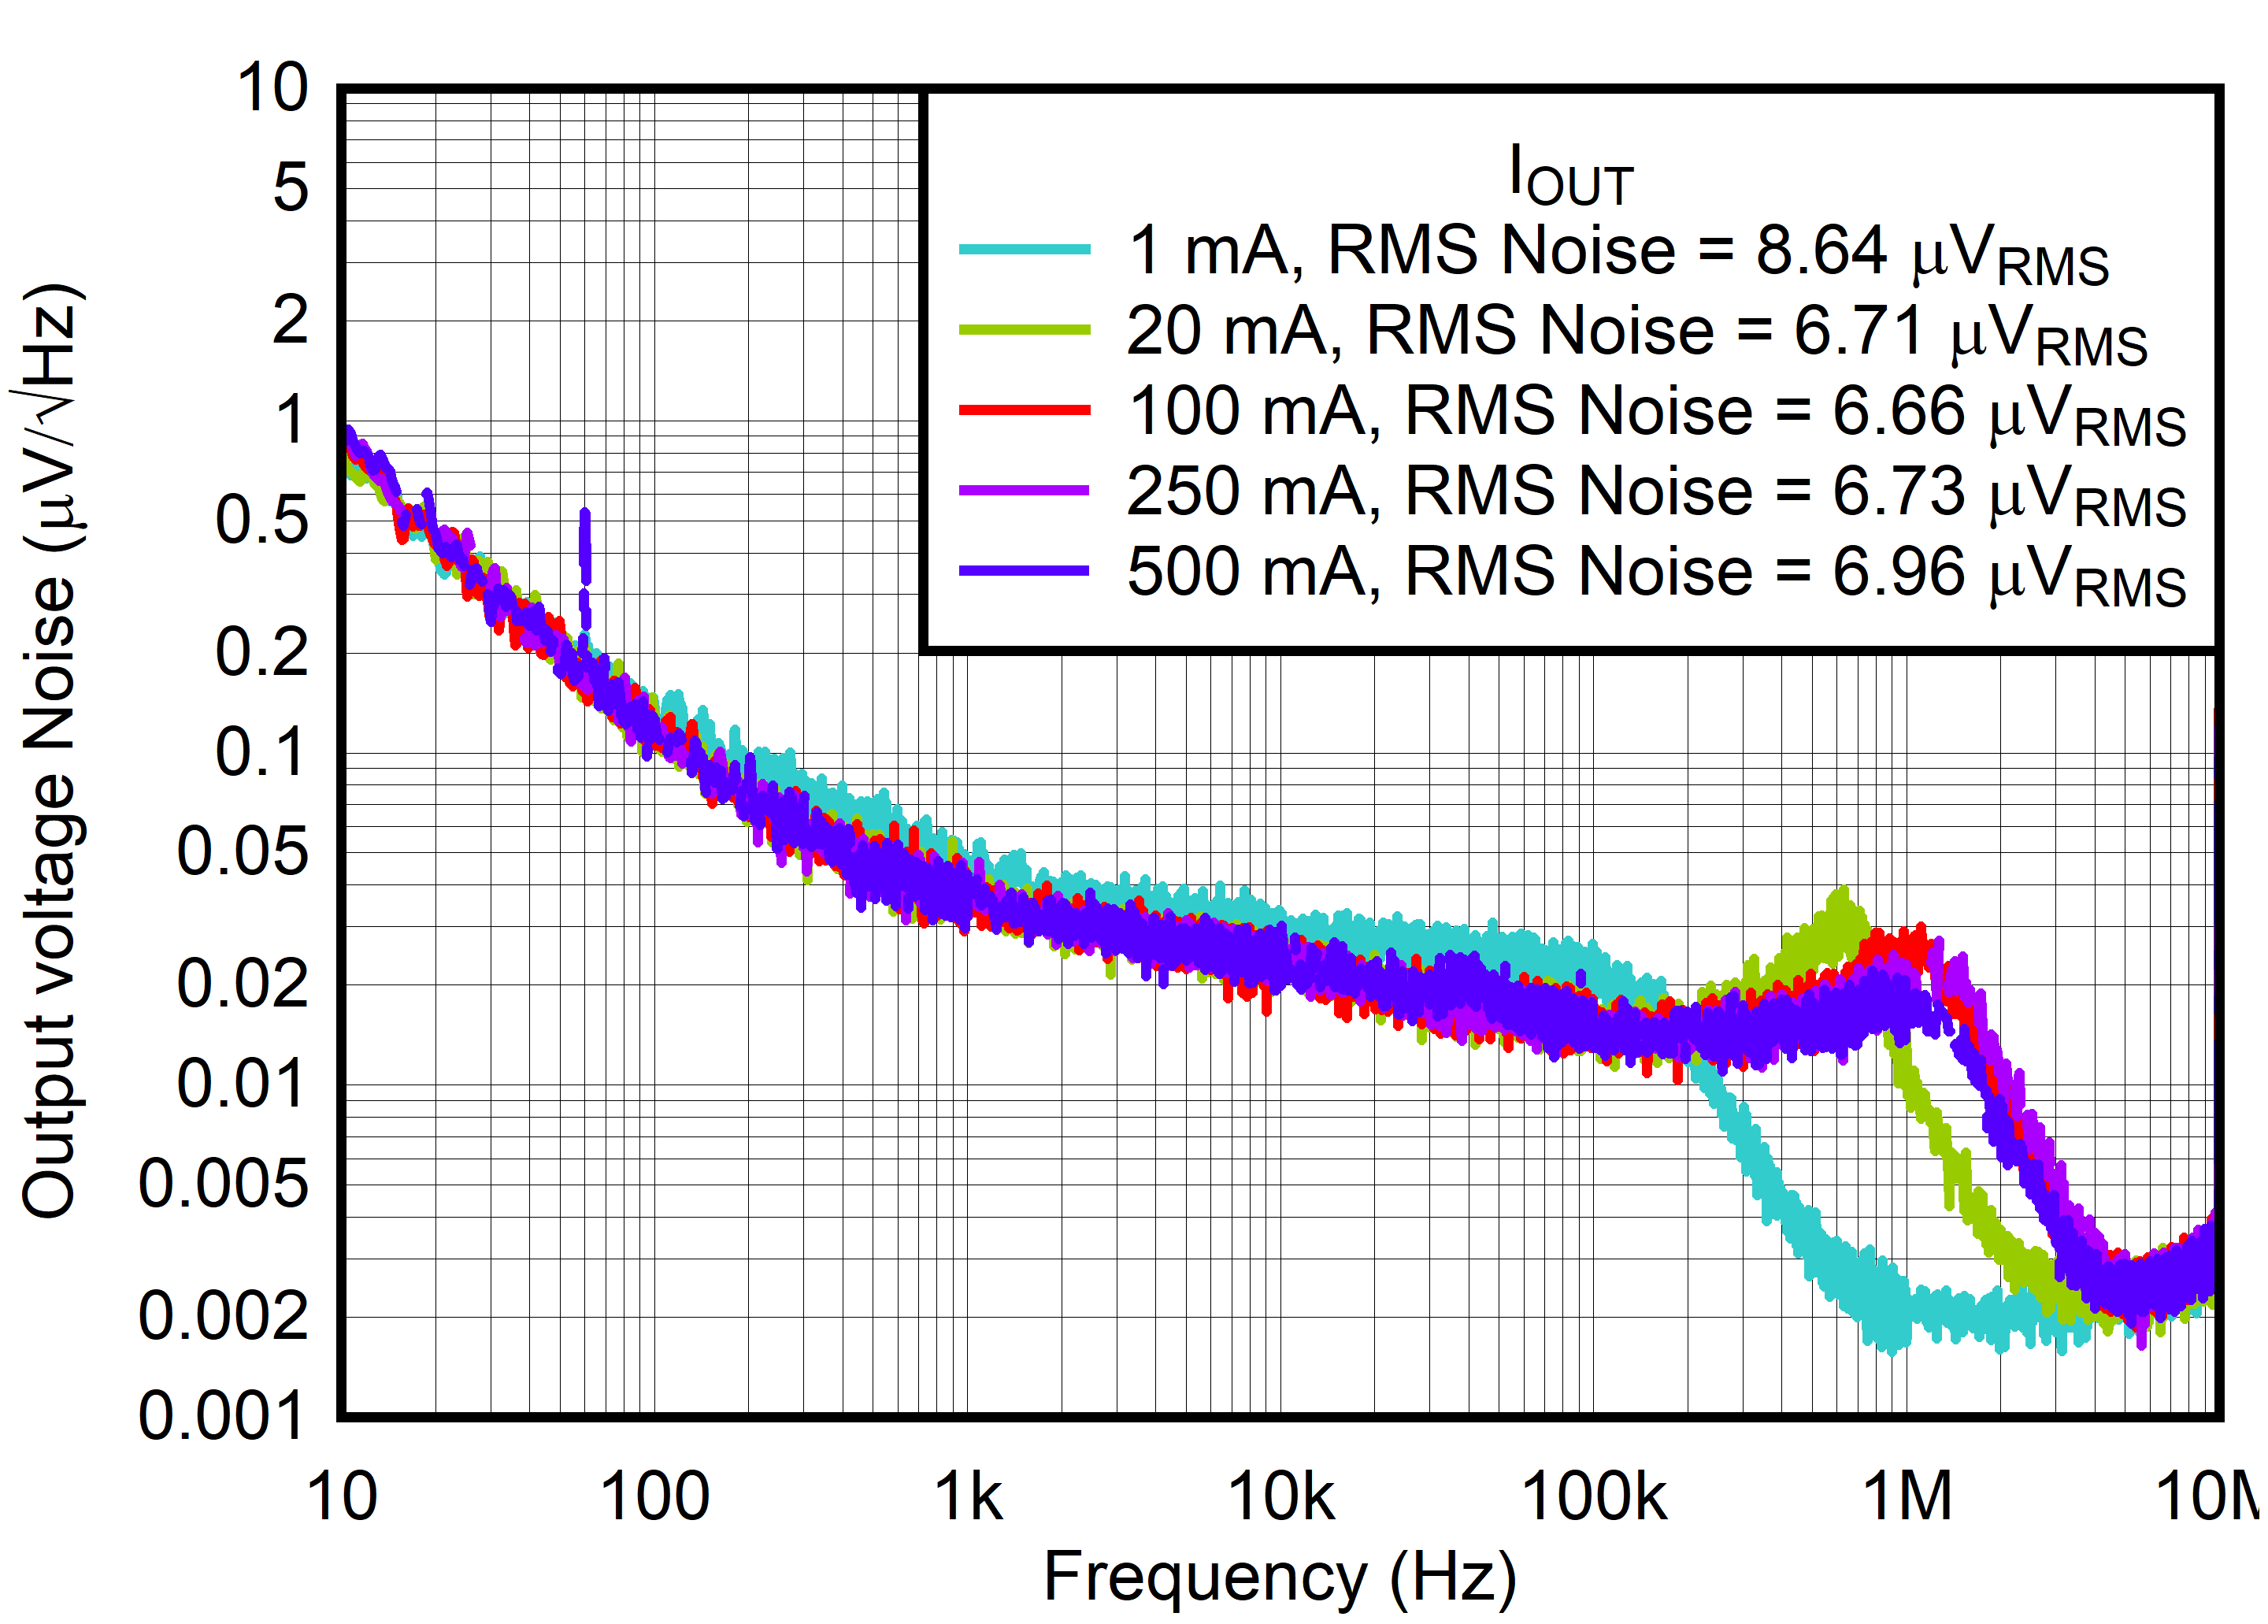 TPS7A21-Q1 Noise
                        vs Frequency and IOUT